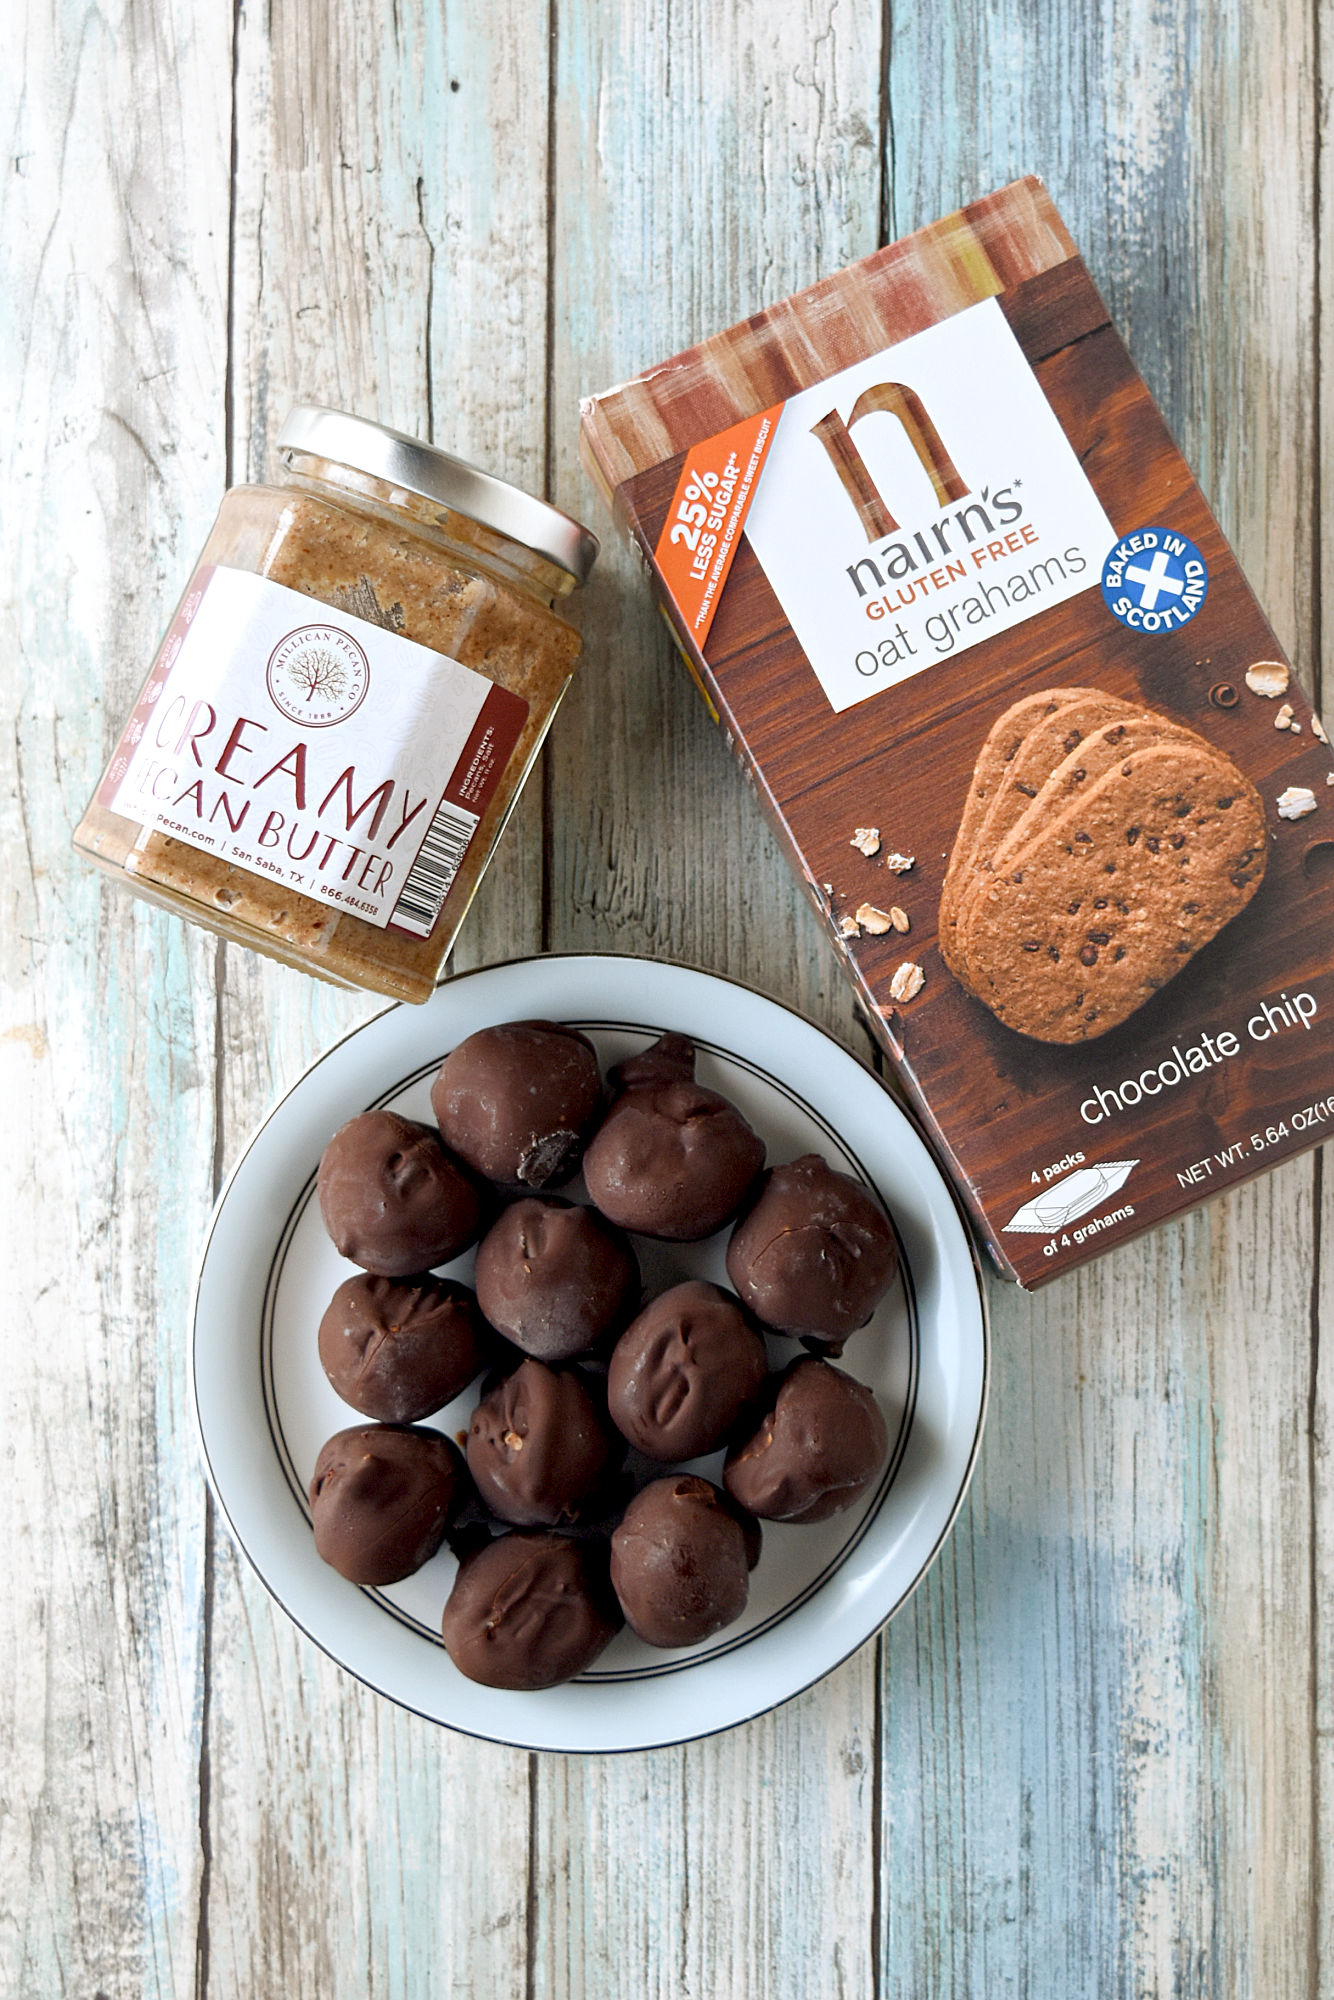 Chocolate Chip Pecan Truffles are healthy cookie truffles! Made with Nairn’s chocolate chip grams and Millican Pecan’s scrumptious pecan butter, these truffles are guilt free and wholesome. #FallFlavors